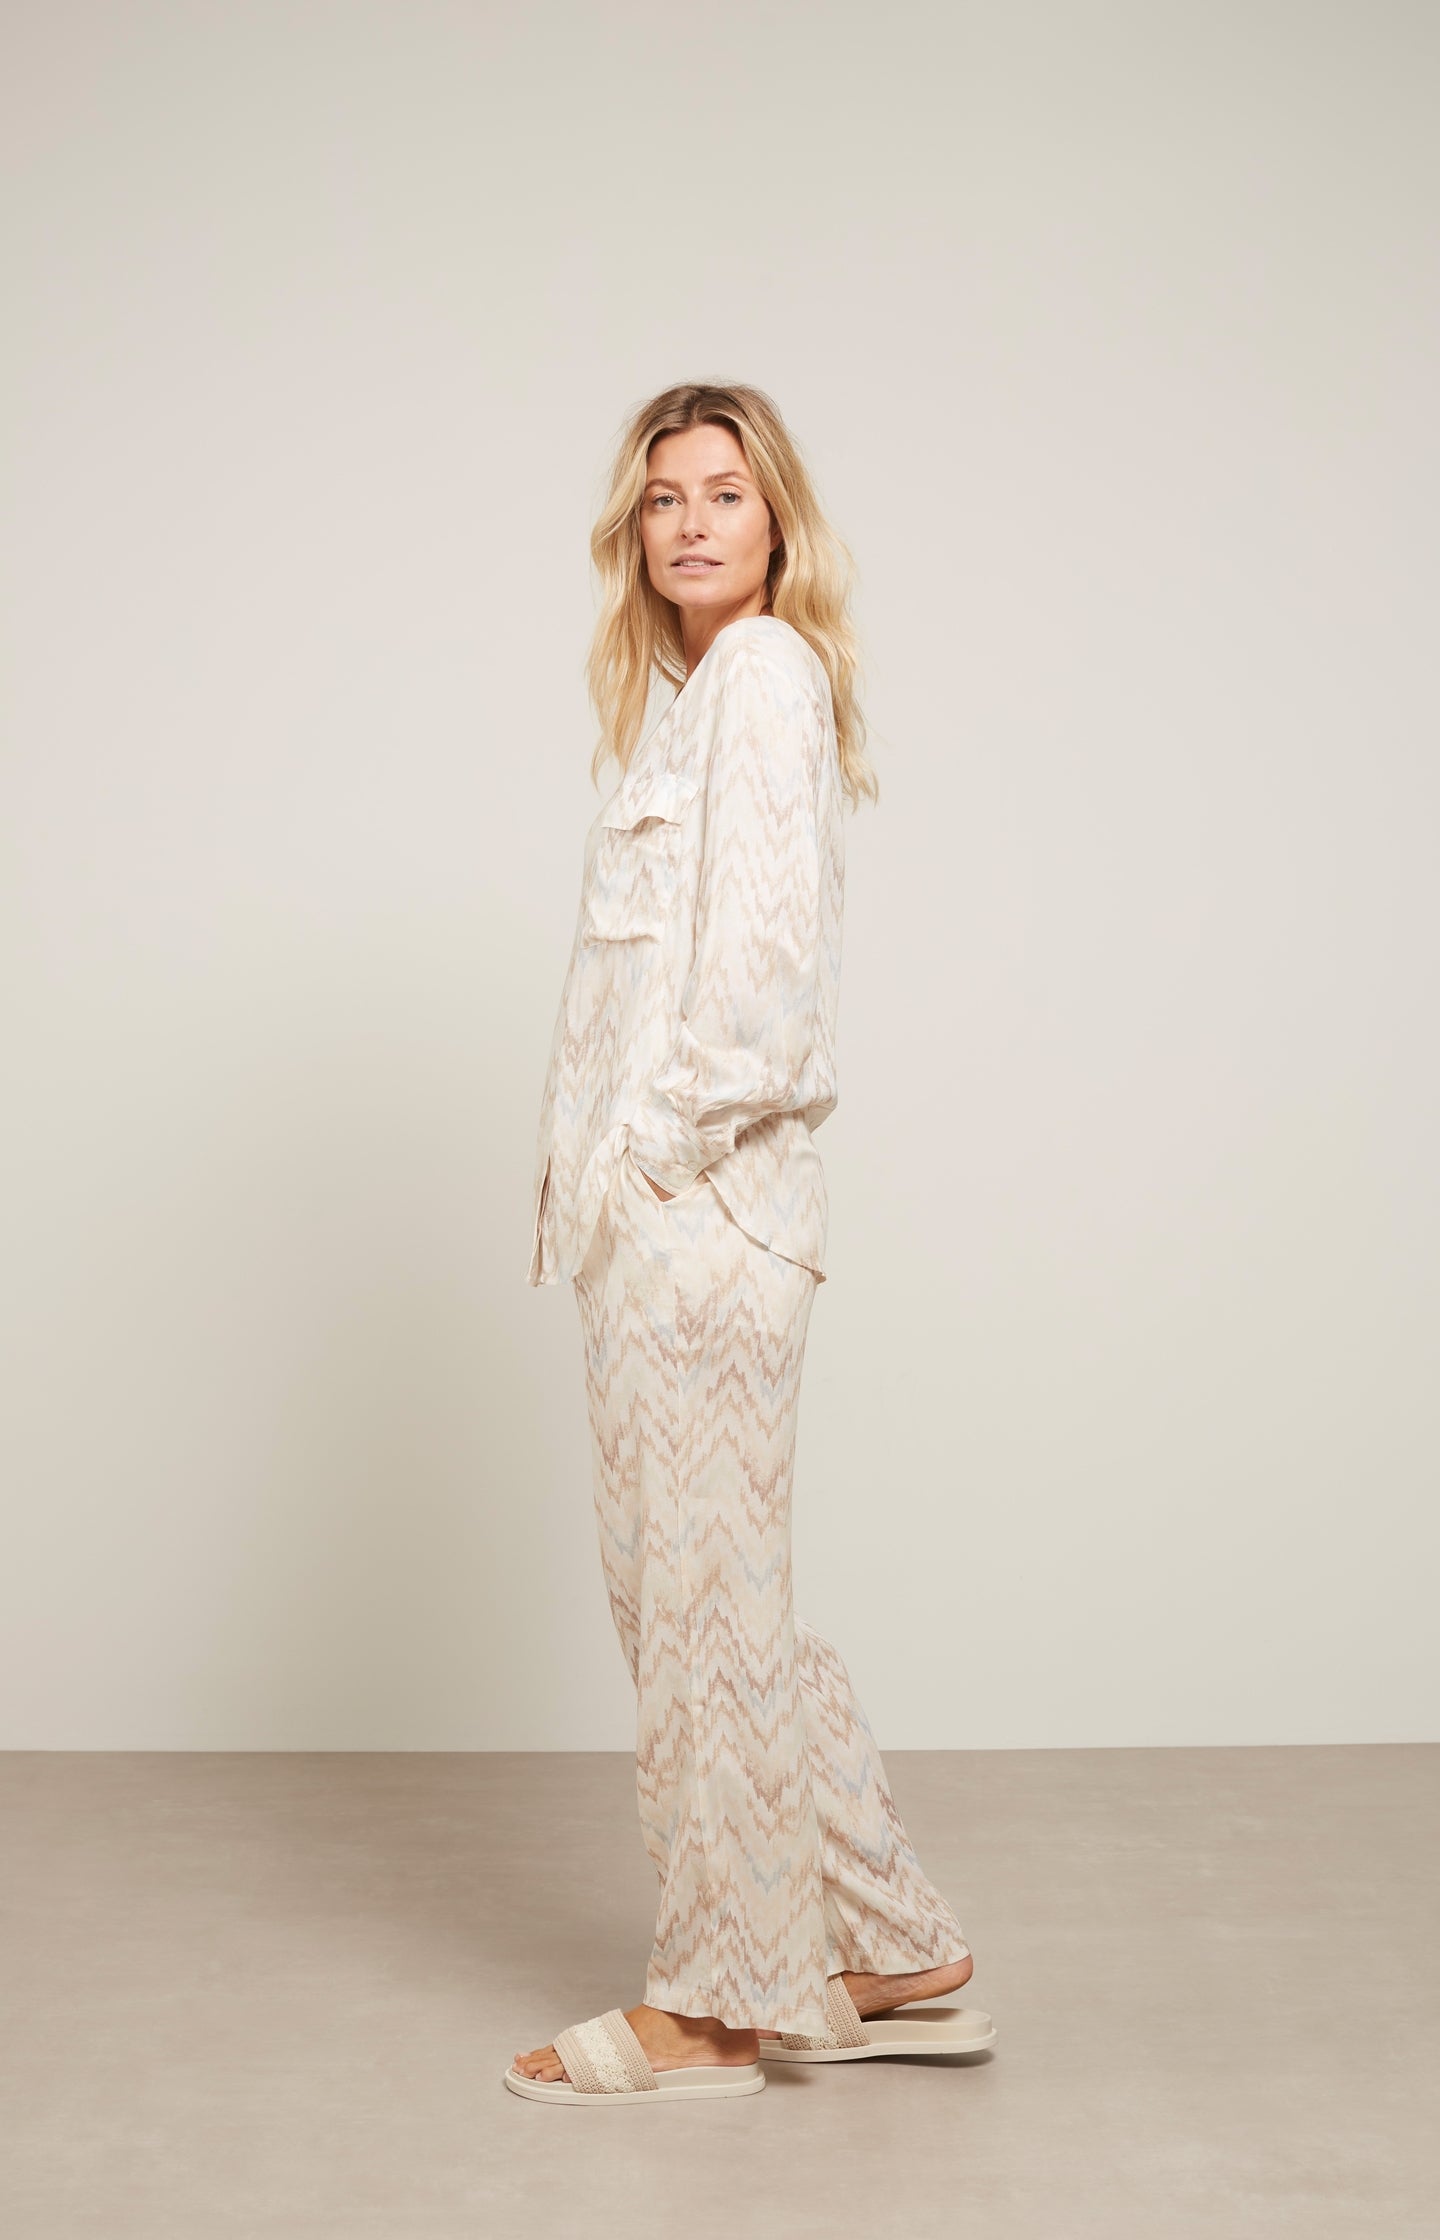 Wide leg trousers with side pockets, zip fly and print